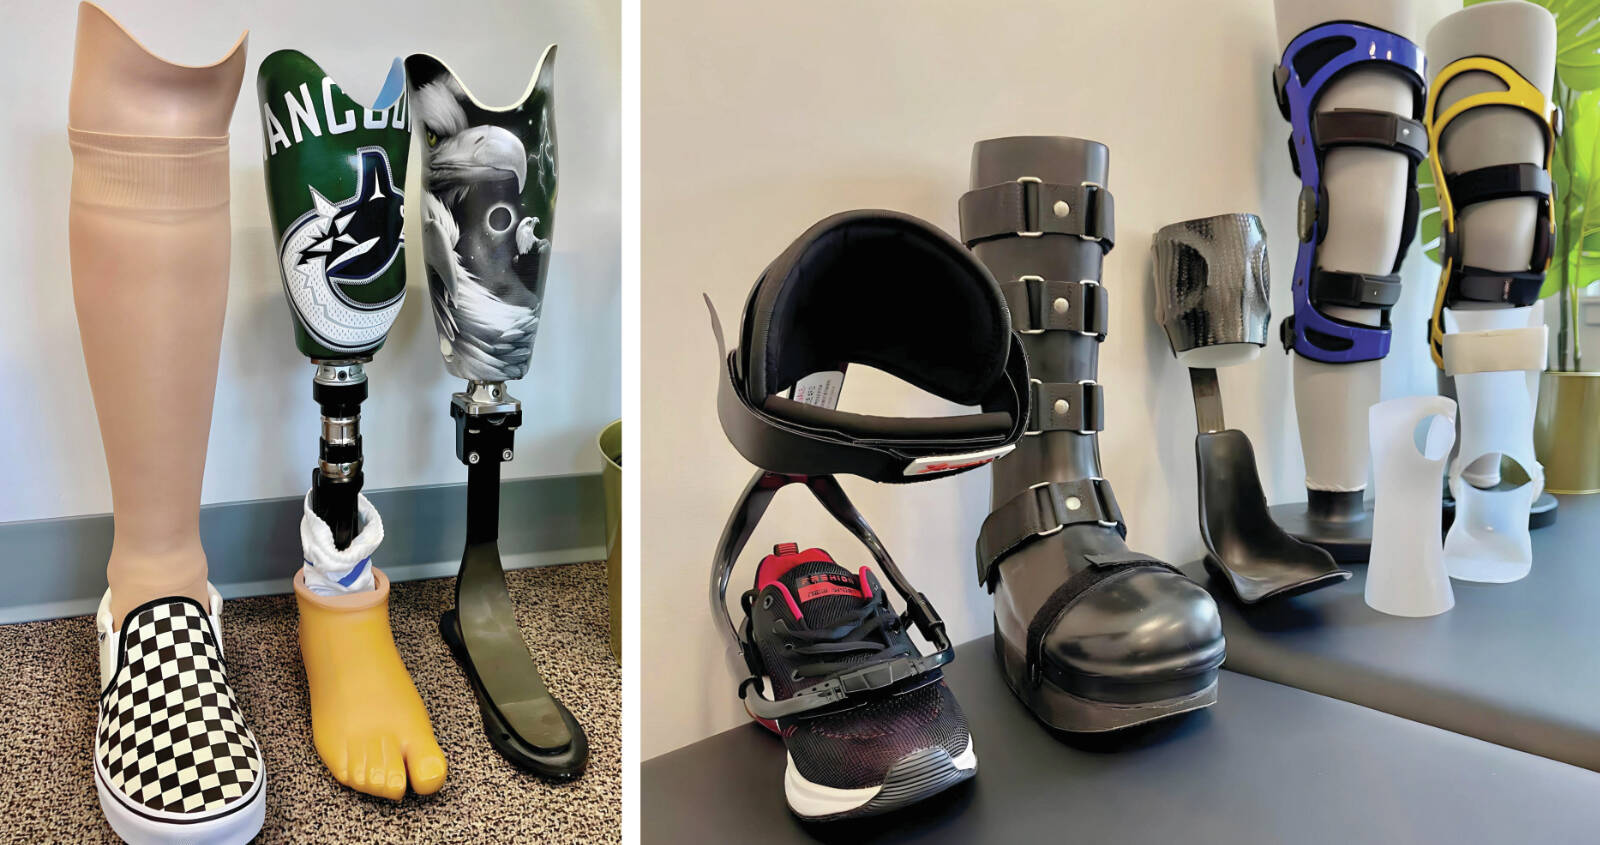 Left: A selection of customized cosmetic designs that Pentlands patients have picked for their finished prosthesis. Right: Patients have the option to customize the cosmetic design of their orthoses.